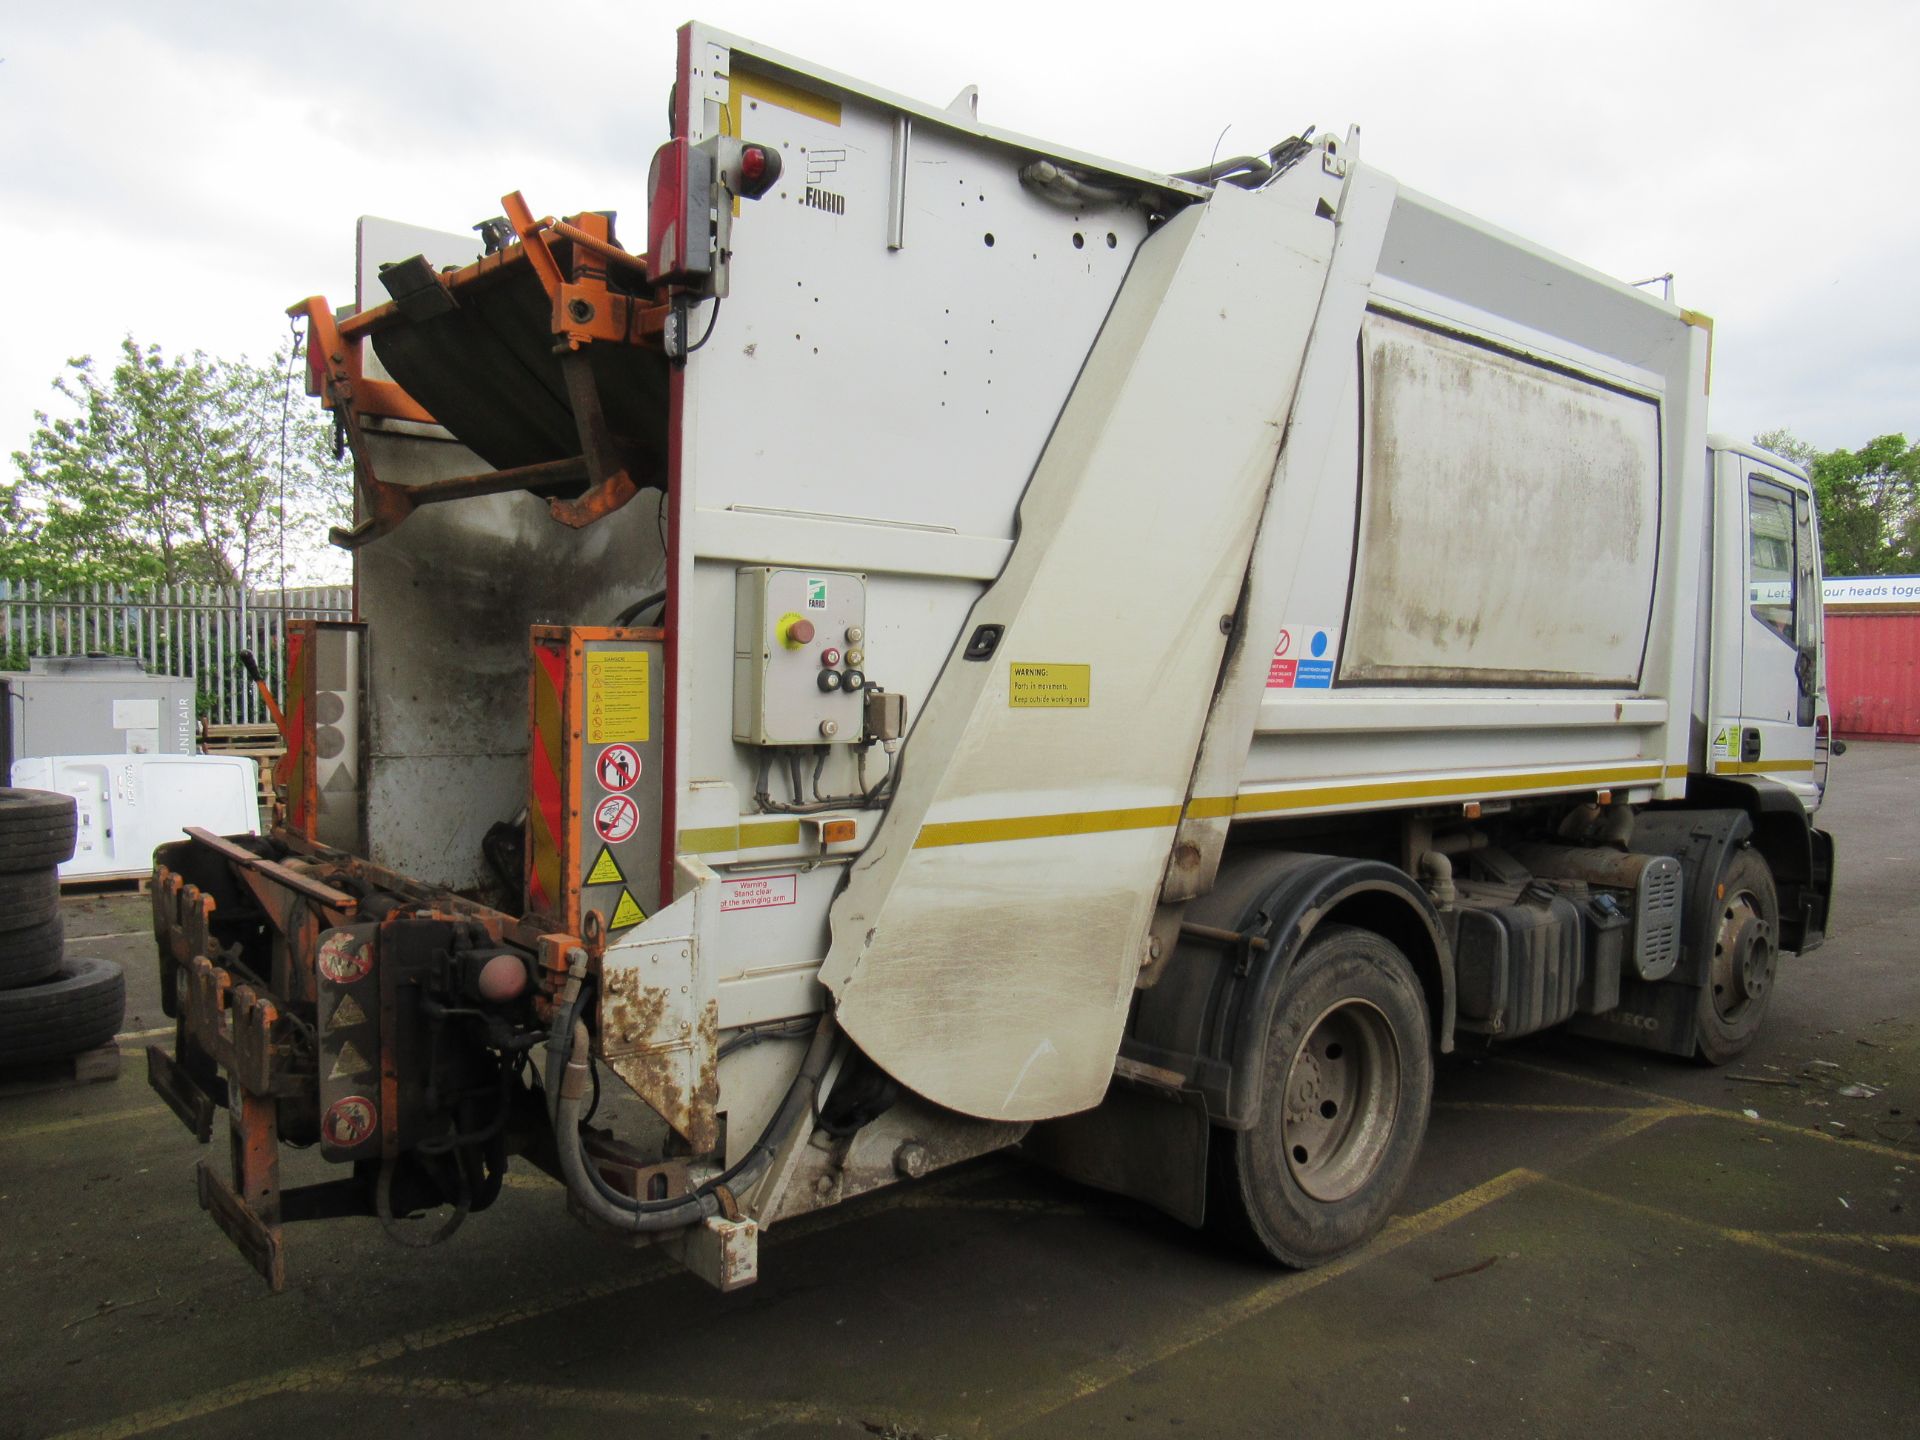 2013 WHITE IVECO EUROCARGO (MY 2008) Refuse Collection Vehicle - Image 7 of 12